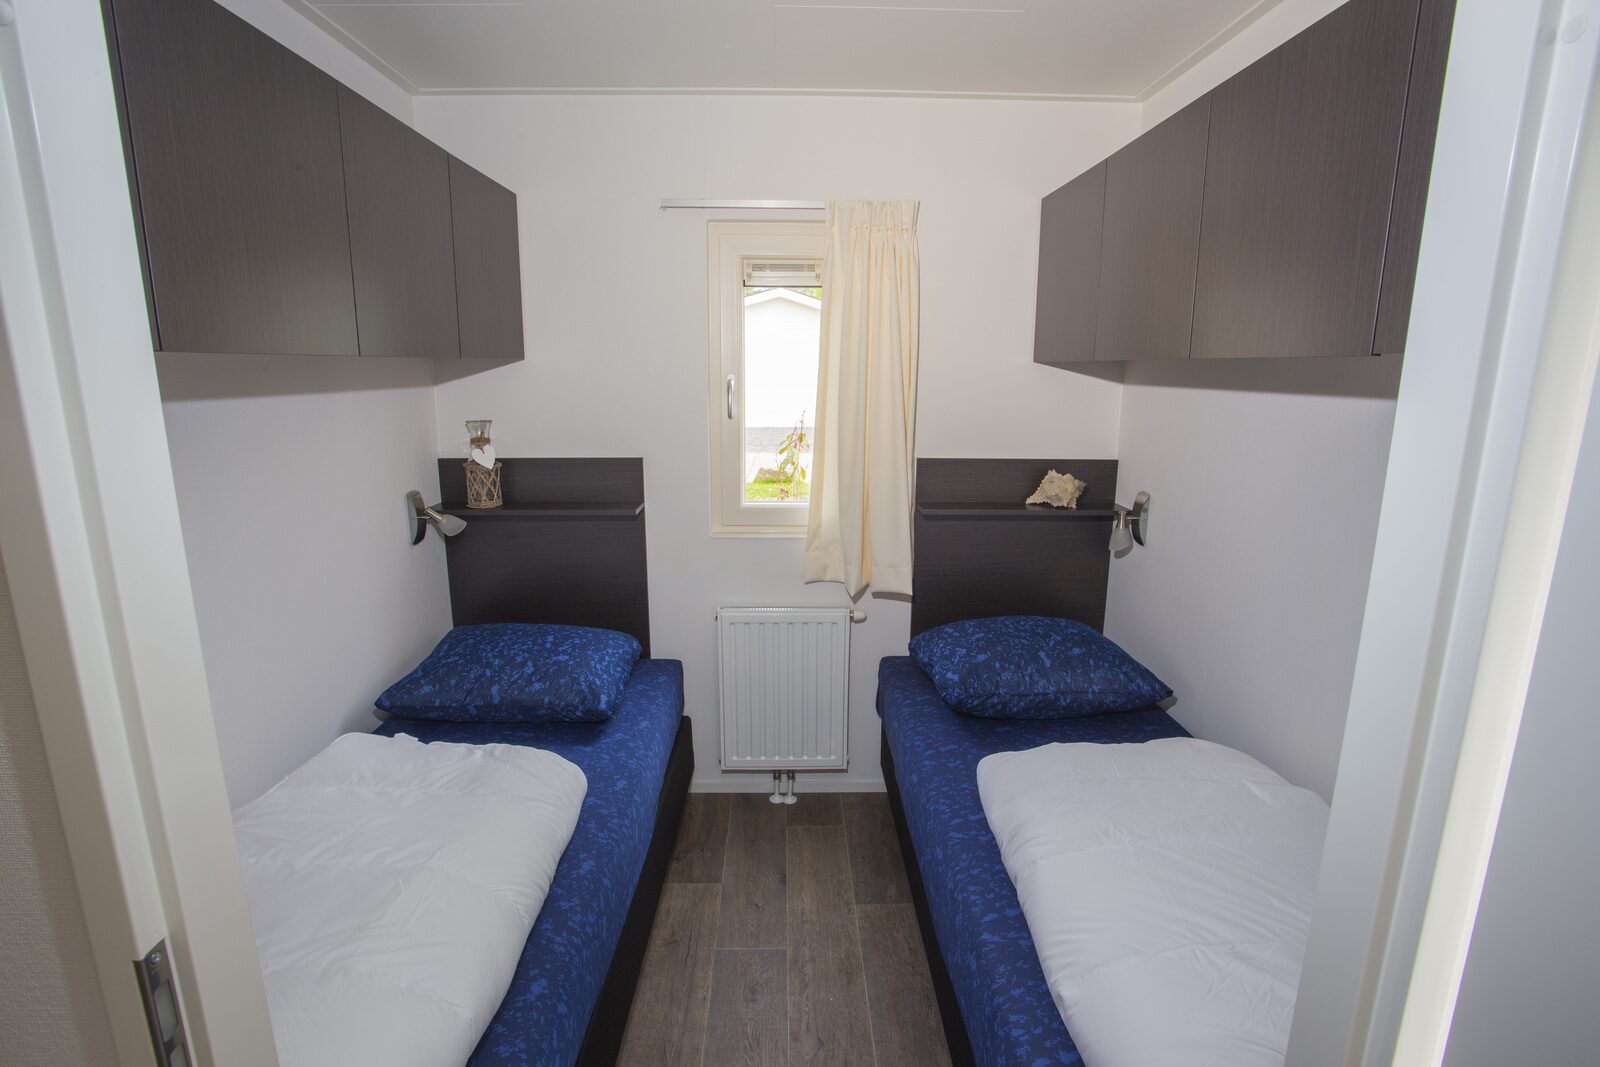 Accommodation for 6 people (without TV), 3 bedrooms